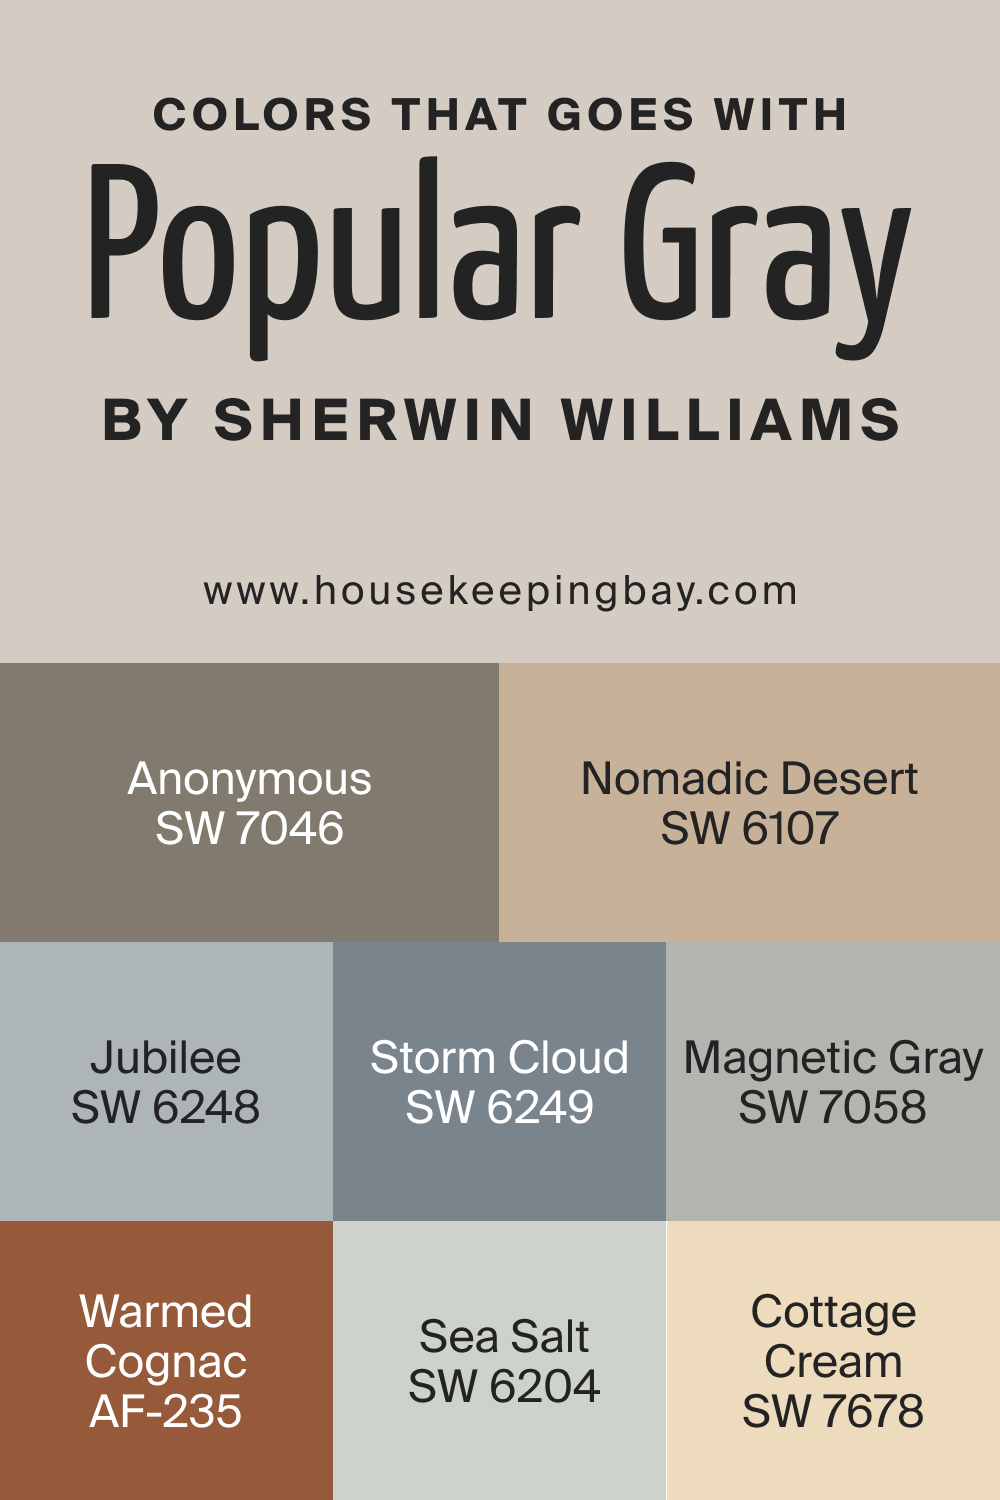 Colors that goes with Popular Gray SW by Sherwin Williams